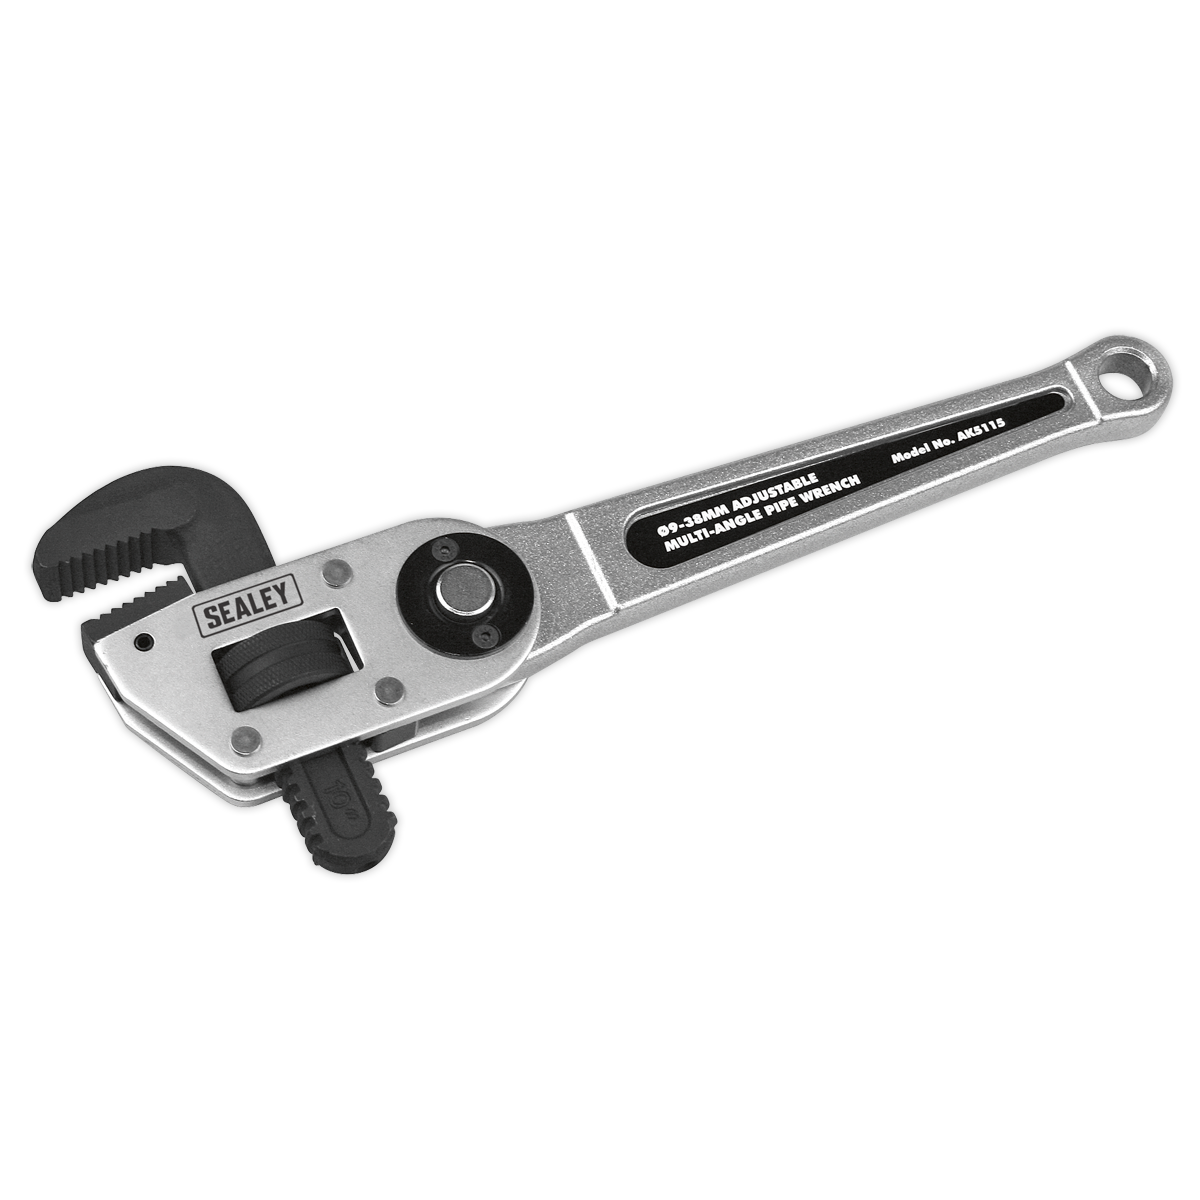 Adjustable Multi-Angle Pipe Wrench Ø9-38mm - AK5115 - Farming Parts